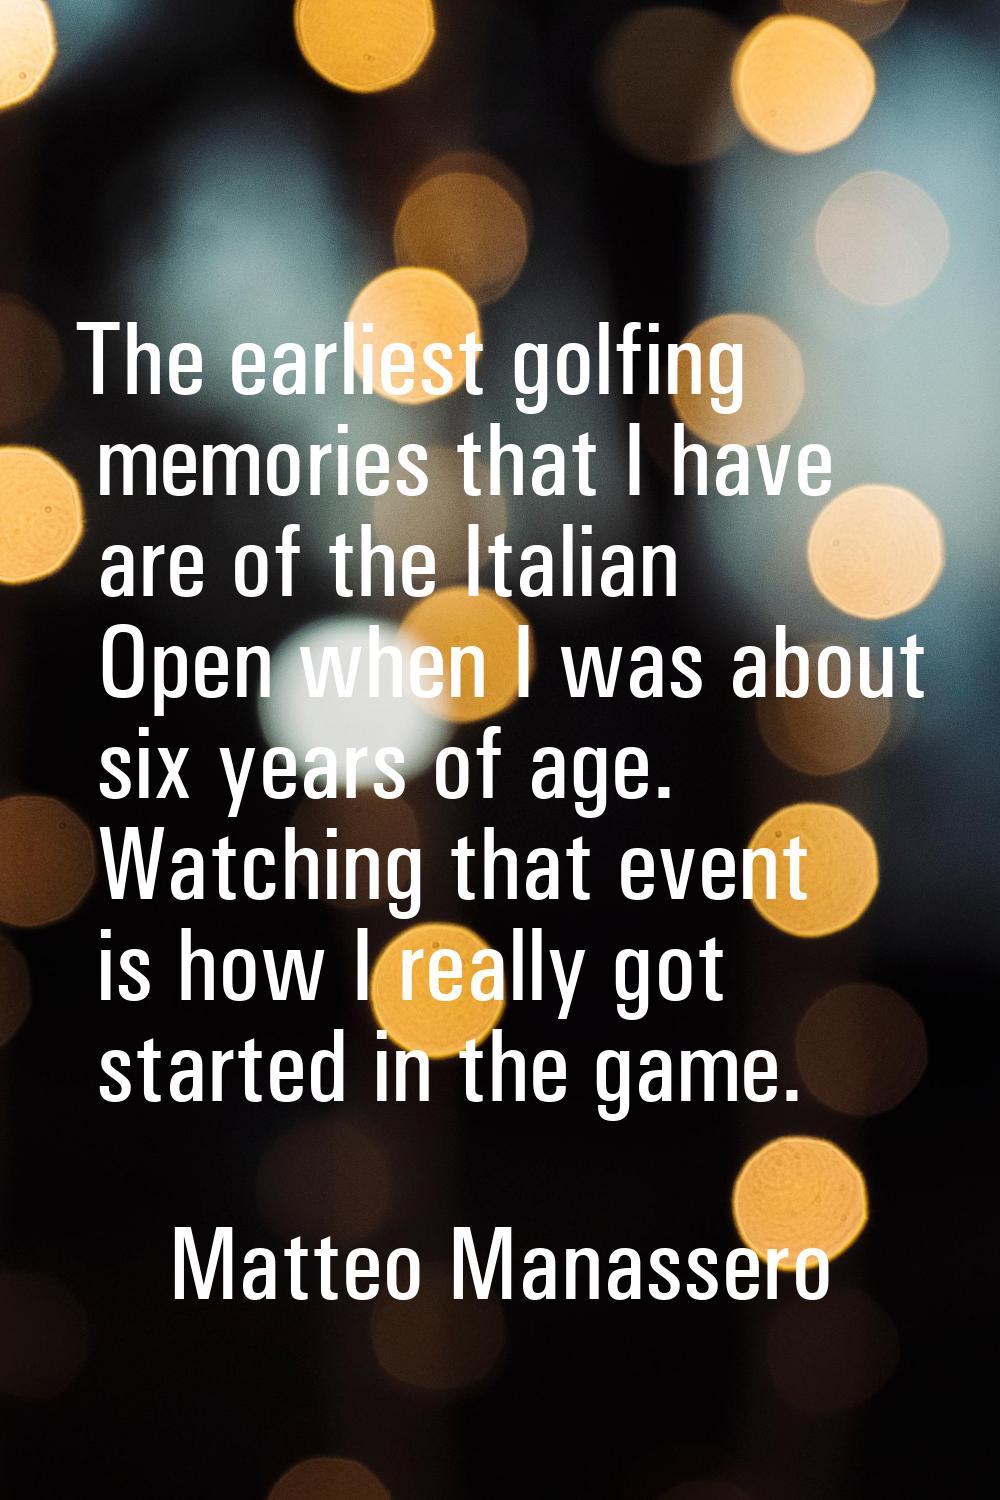 The earliest golfing memories that I have are of the Italian Open when I was about six years of age